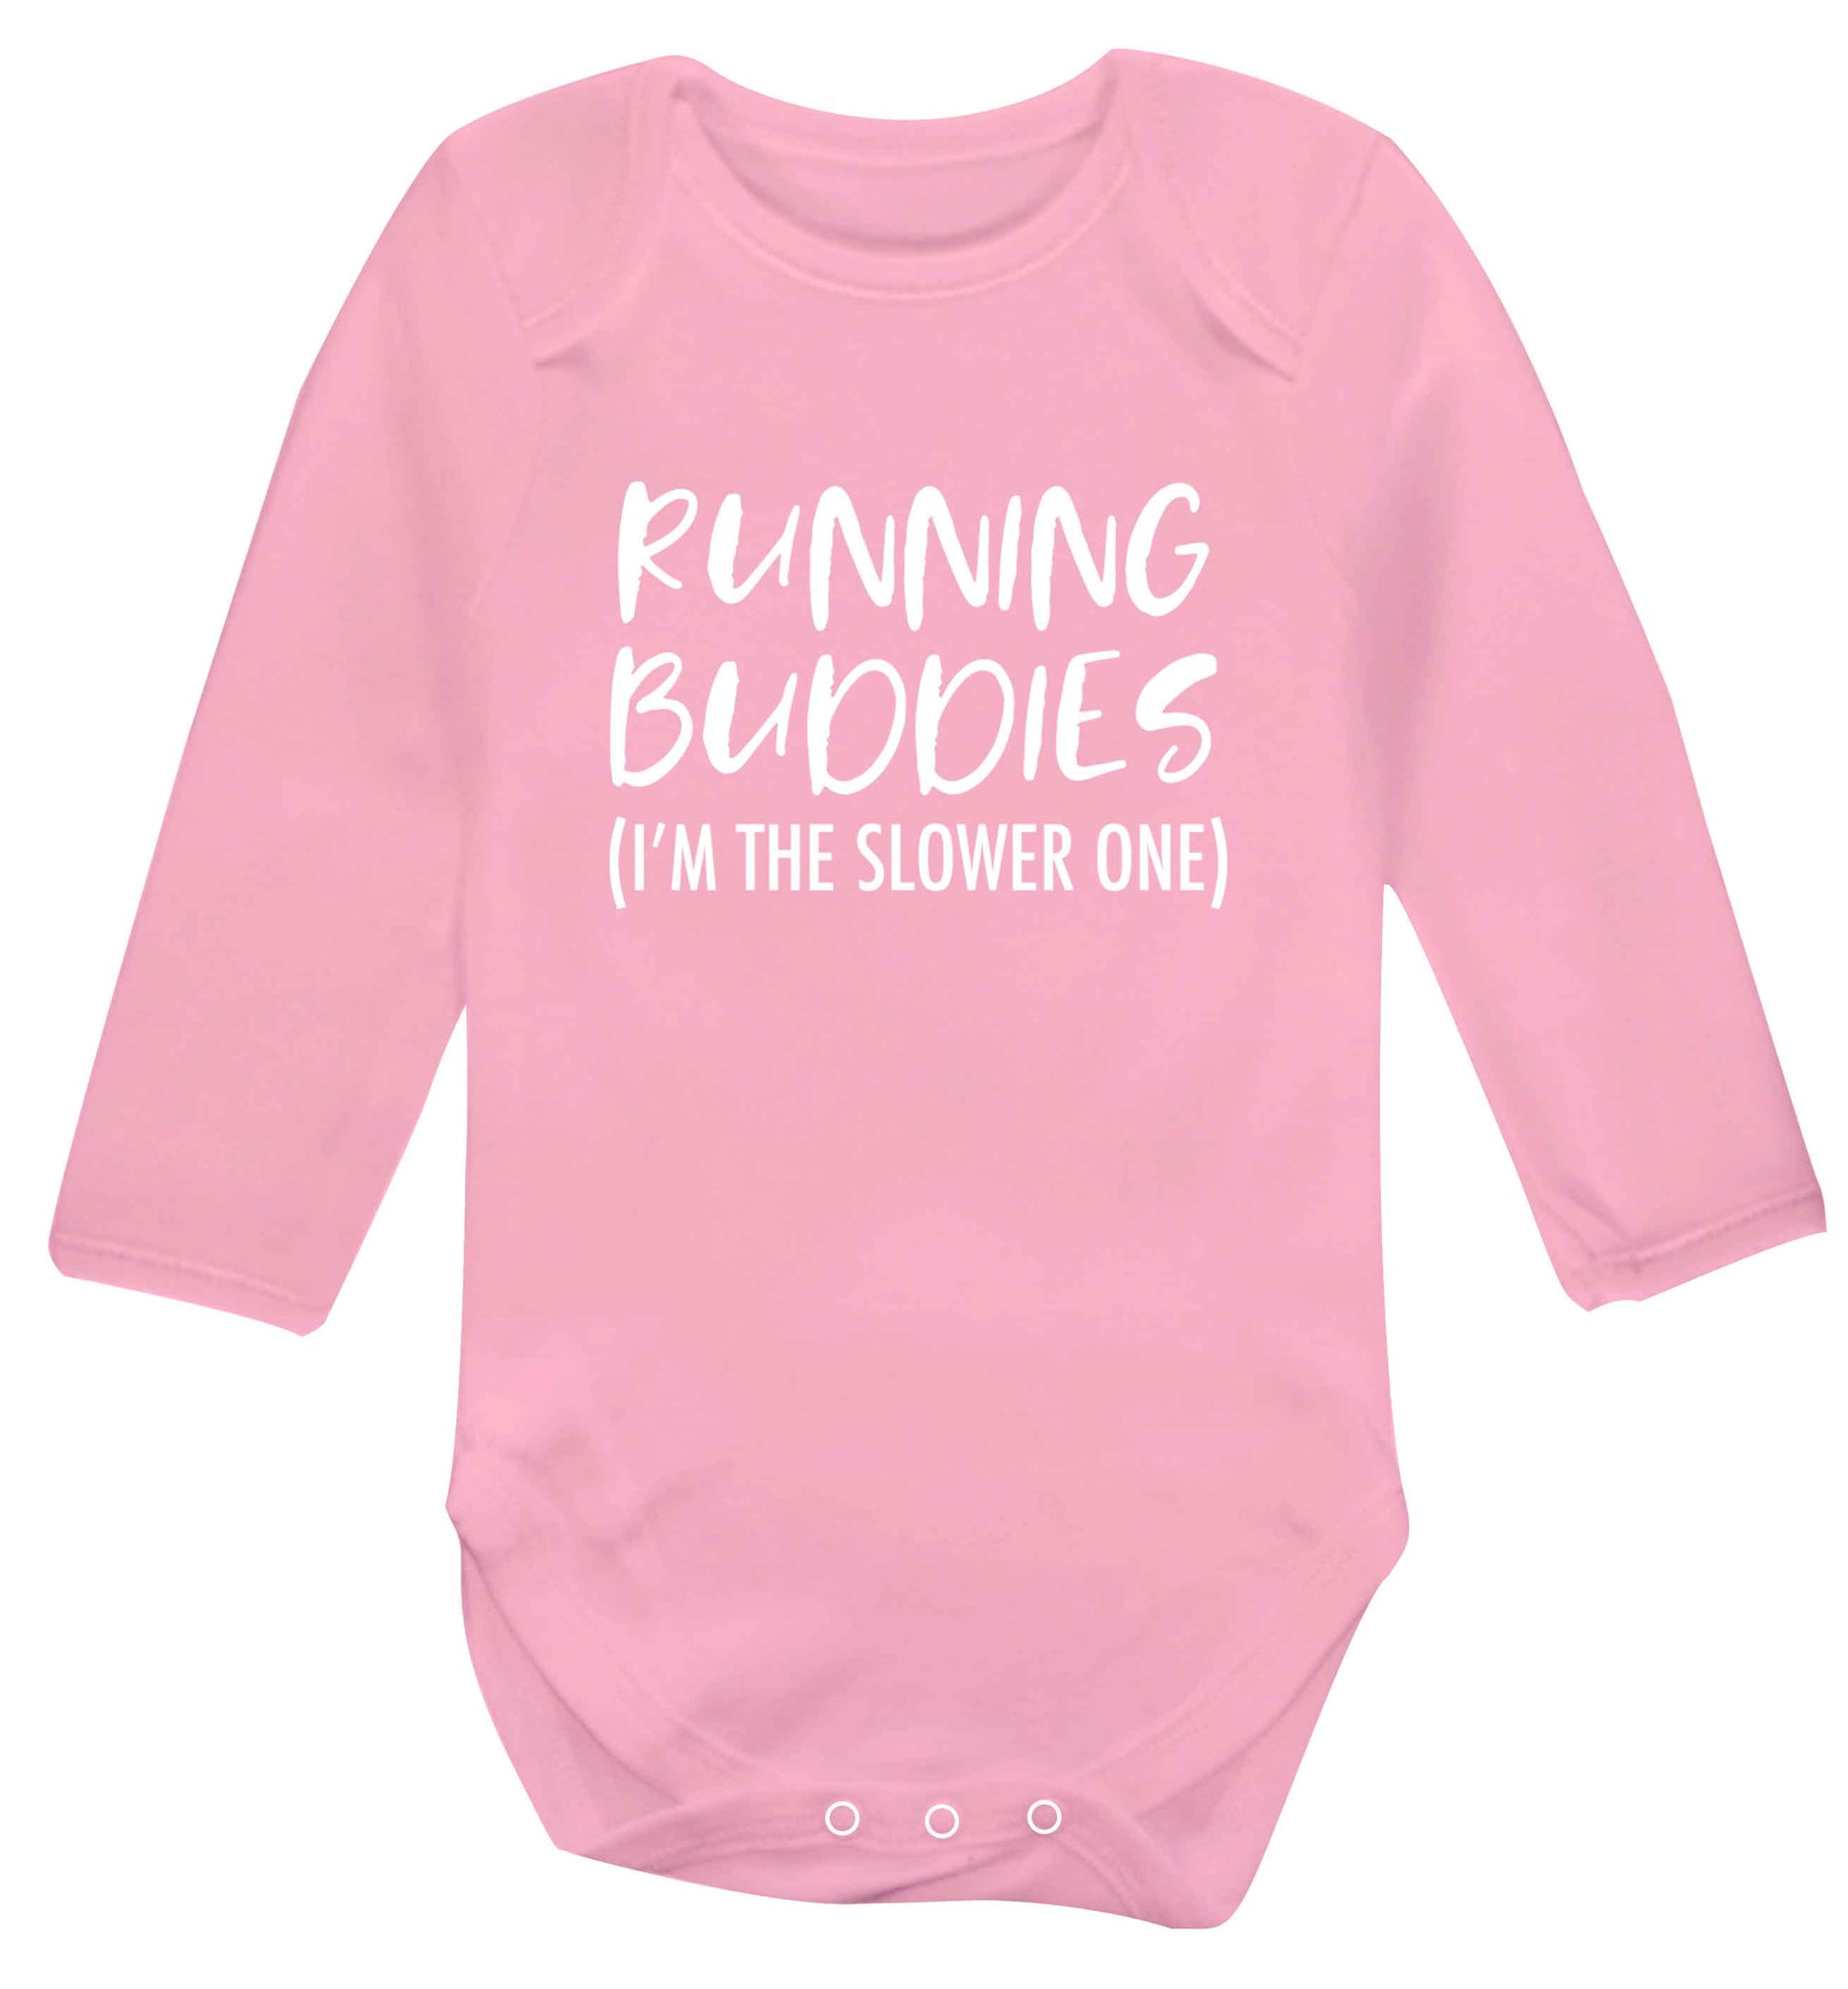 Running buddies (I'm the slower one) baby vest long sleeved pale pink 6-12 months